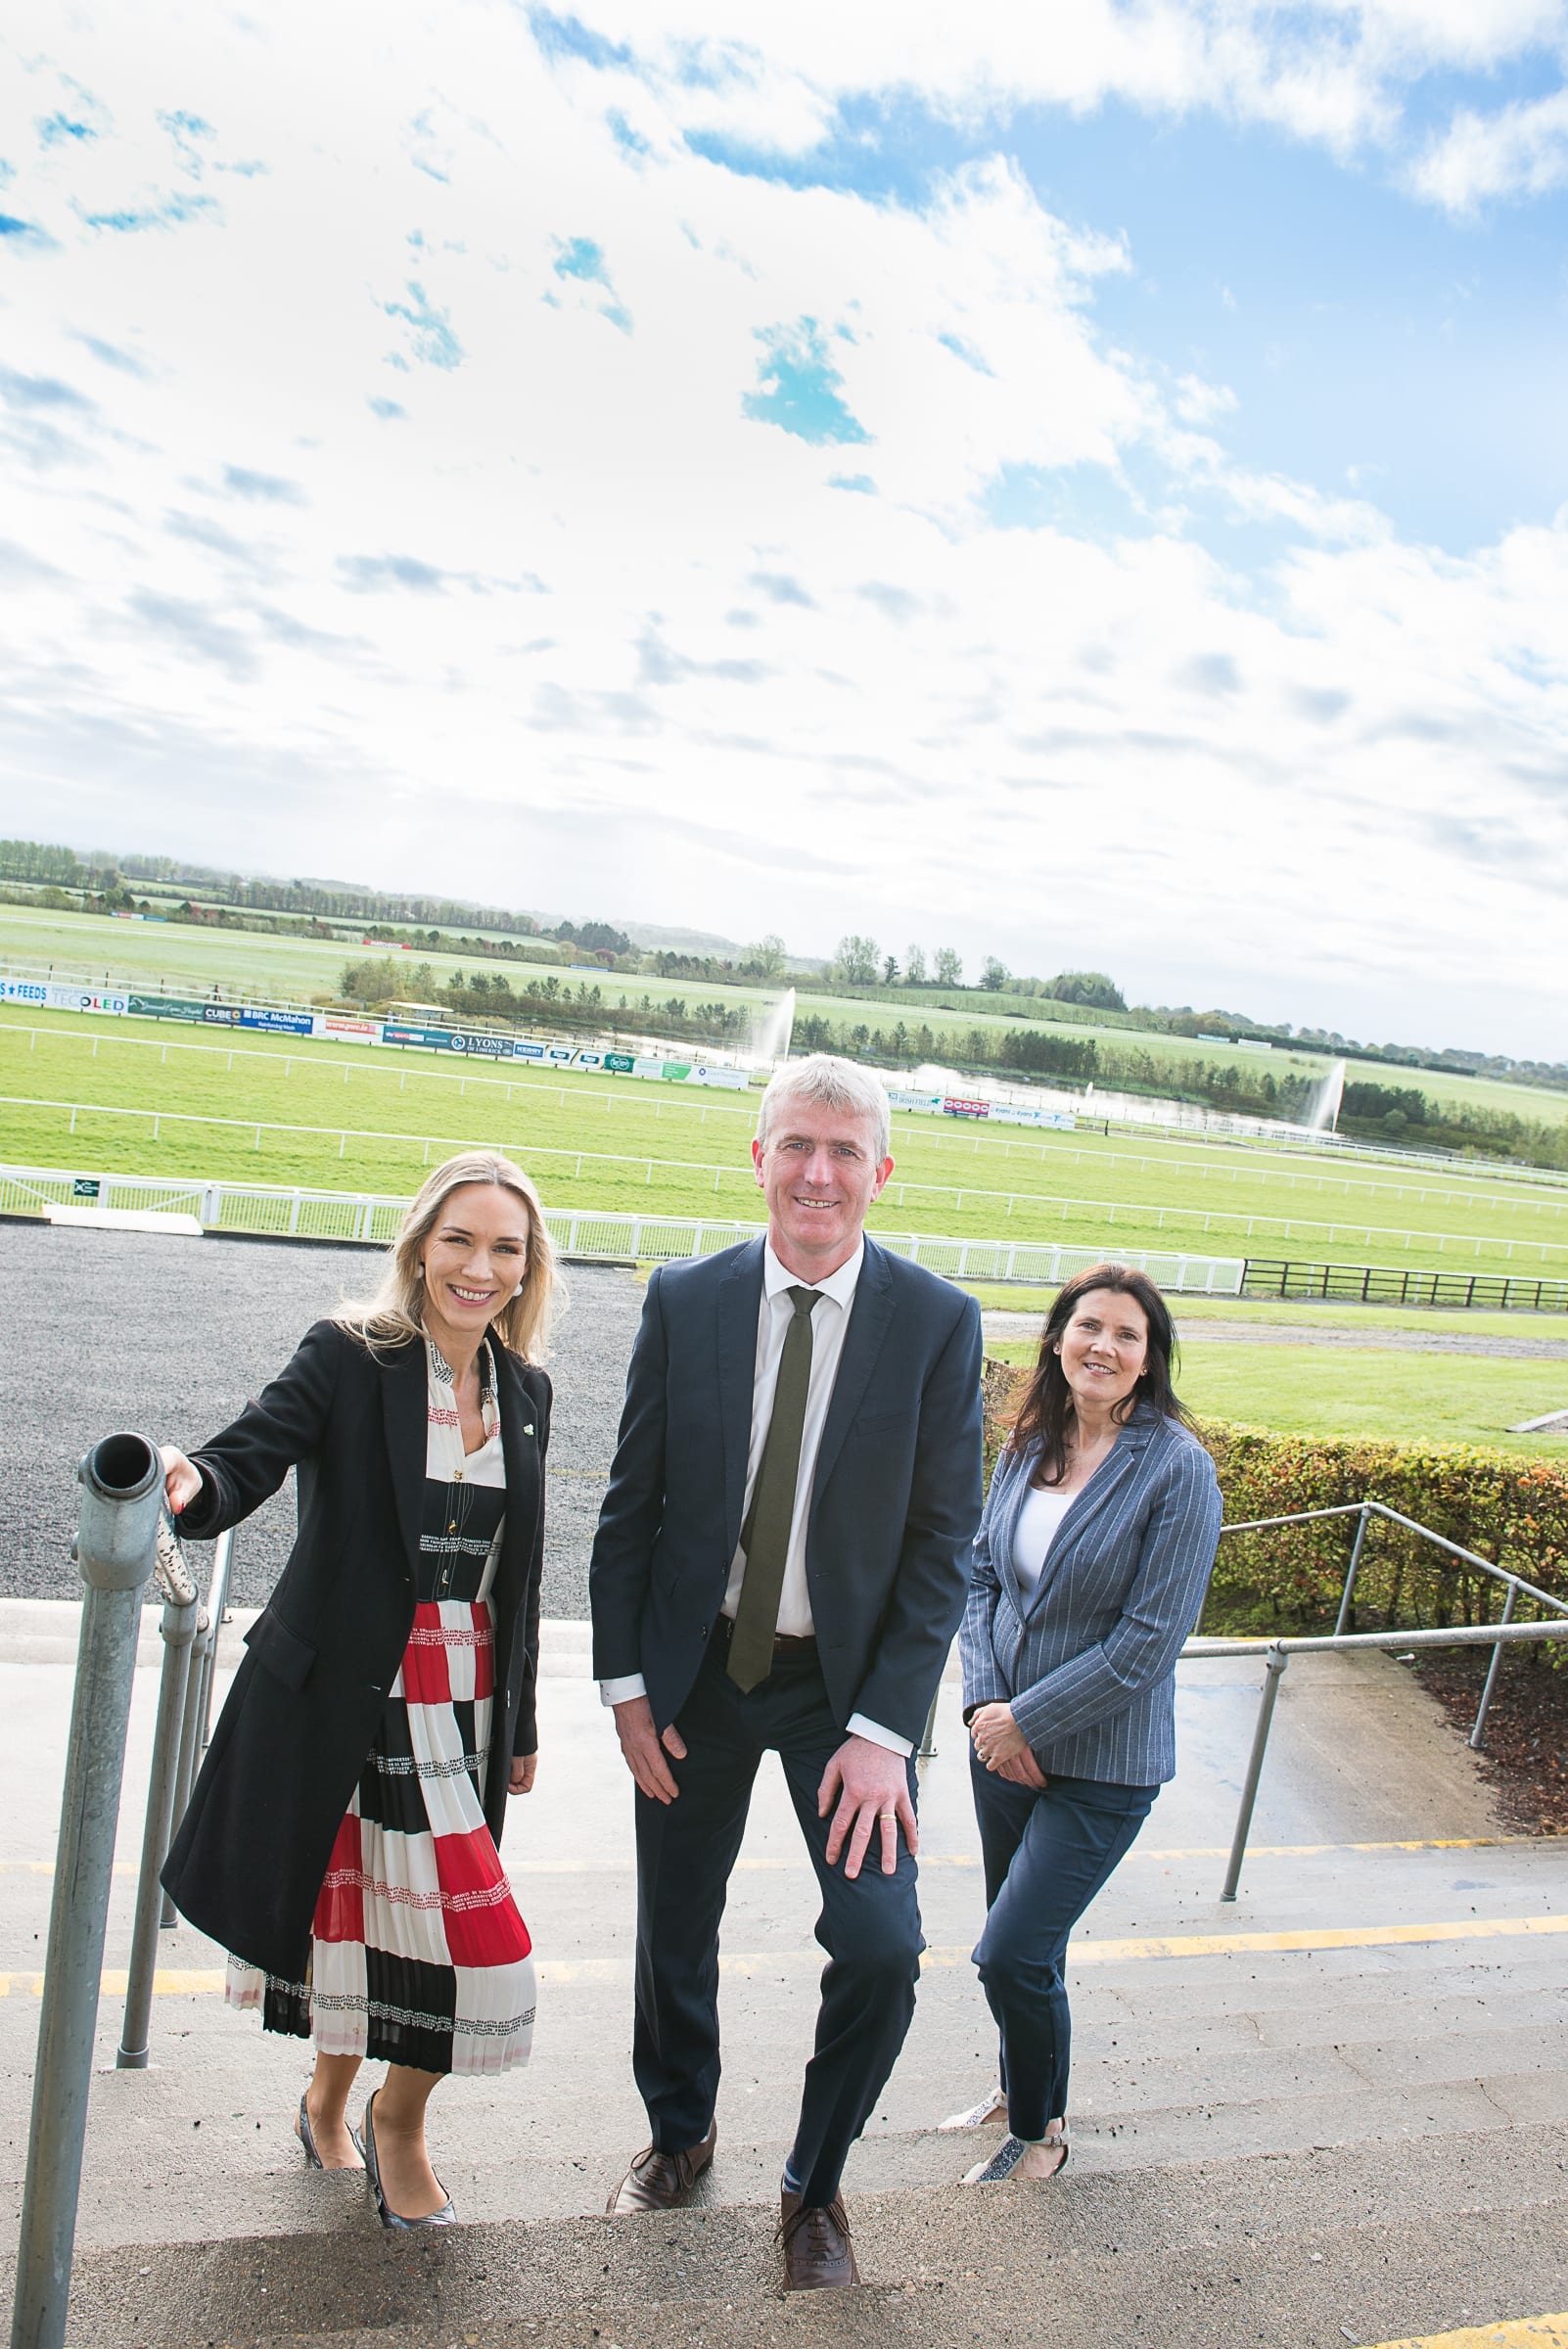 From Left to Right:  Upskilling the MidWest with John Kiely which took place on the 30th April in function room of the Limerick Racecourse: Dee Ryan - CEO Limerick Chamber Skillnet, John Kiely - Limerick Hurling Manager / Keynote Speaker, Anne Morris - Limerick Chamber Skillnet